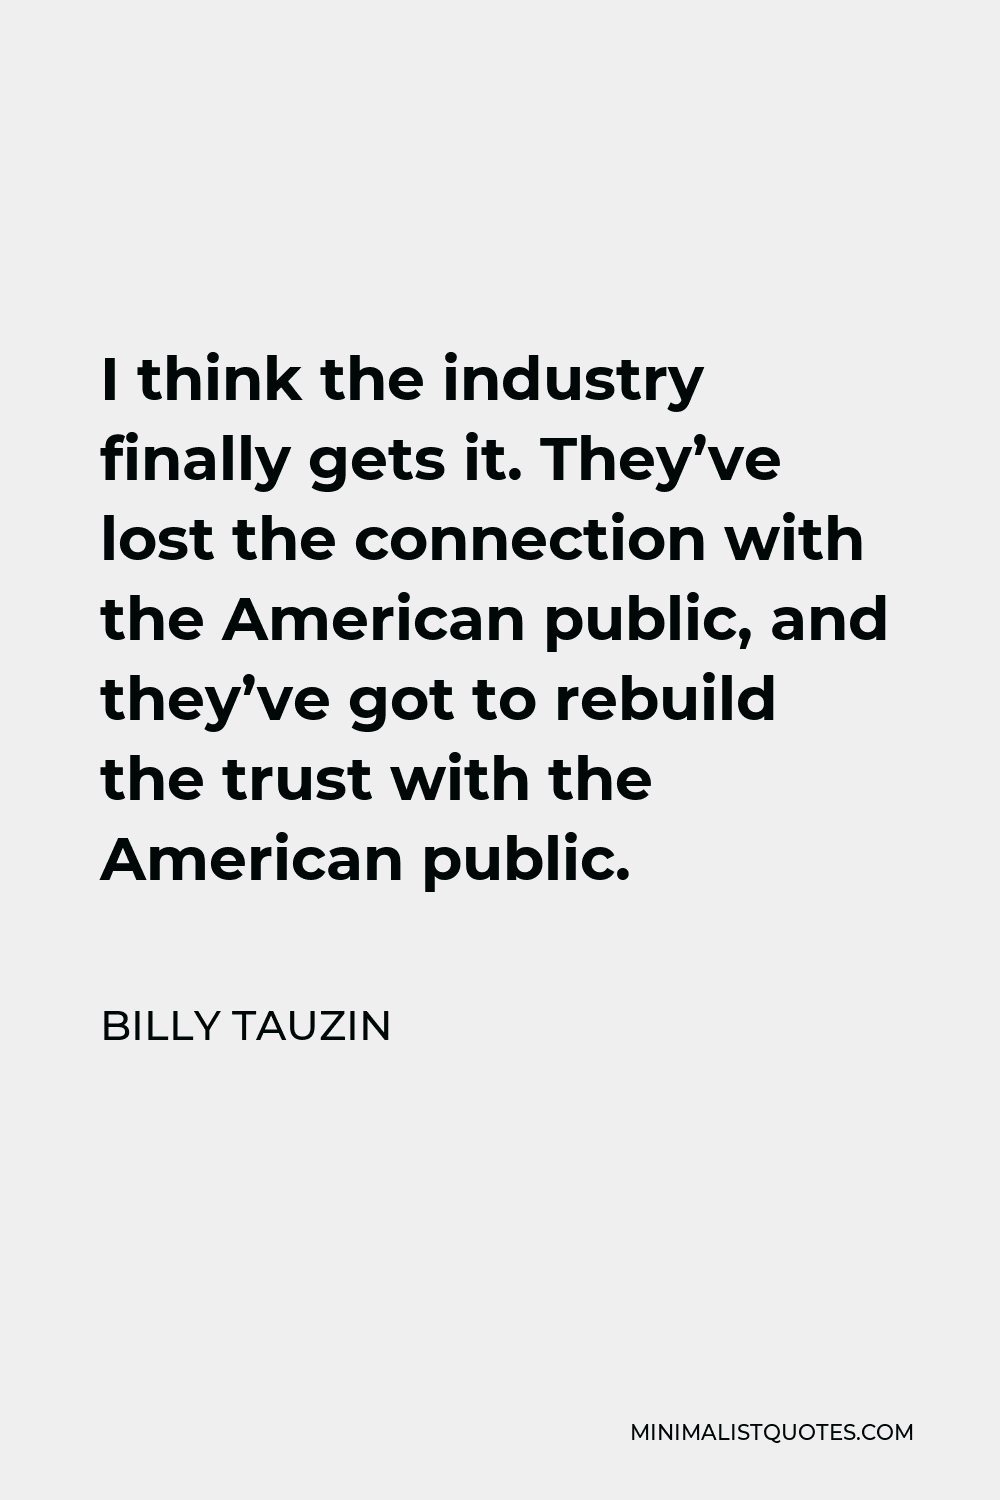 Billy Tauzin Quote - I think the industry finally gets it. They’ve lost the connection with the American public, and they’ve got to rebuild the trust with the American public.